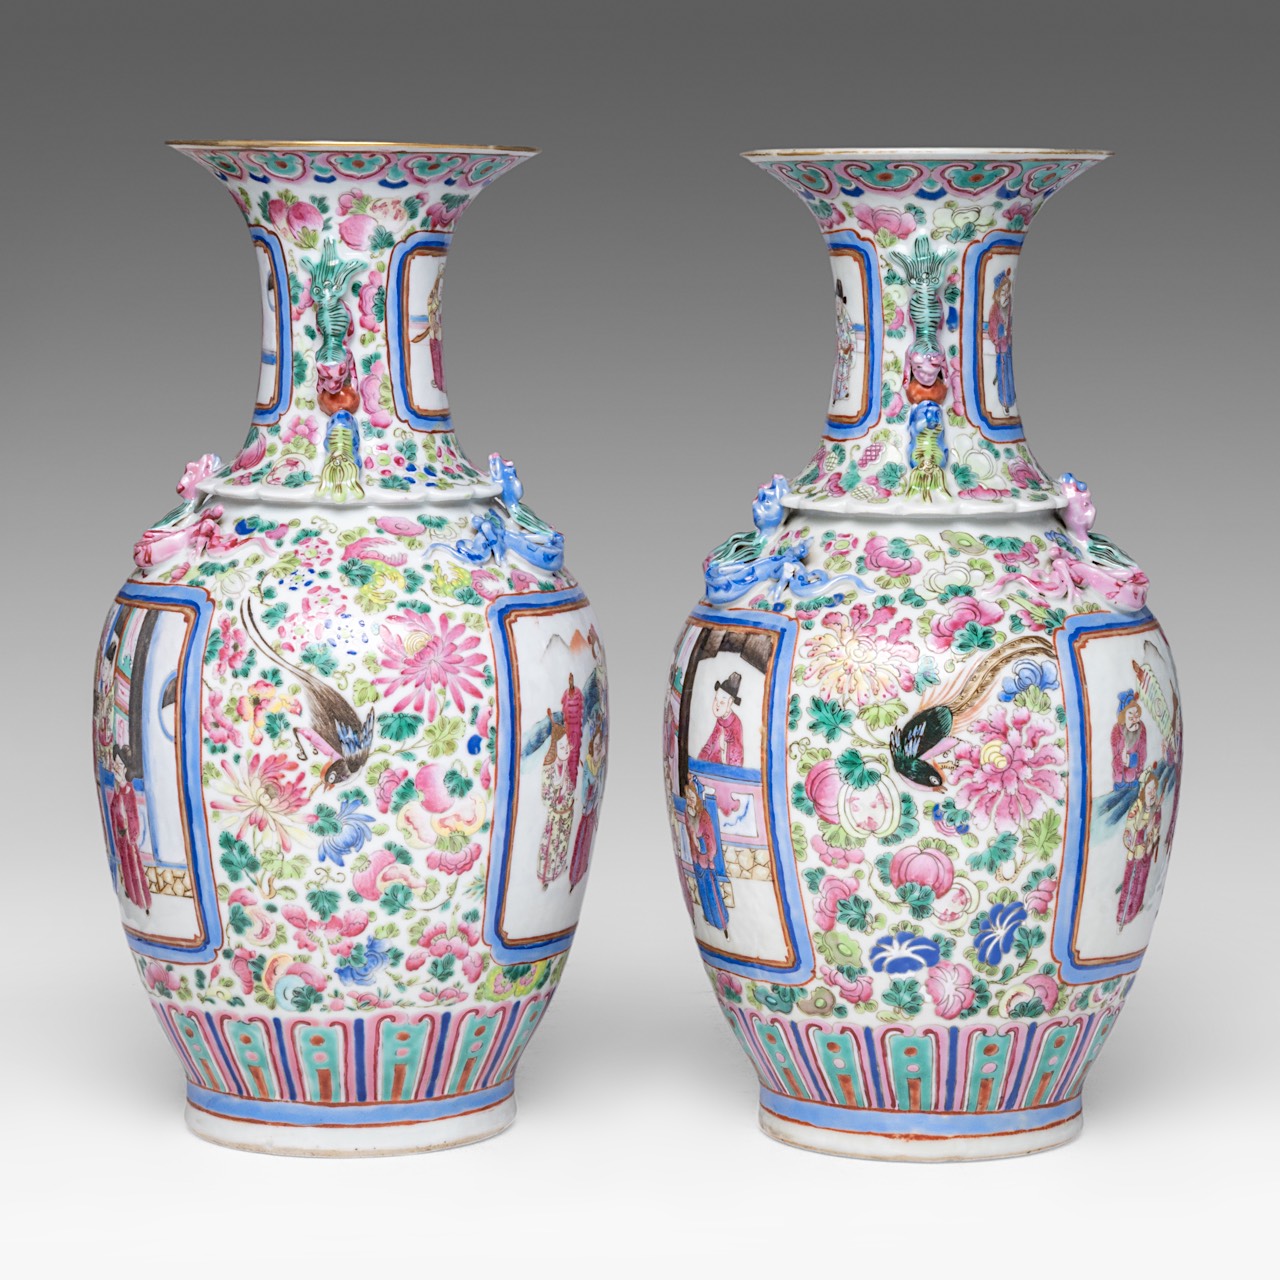 A pair of Chinese famille rose 'Romance of the Three Kingdoms' vases, late 19thC, H 43 cm - added a - Image 5 of 13